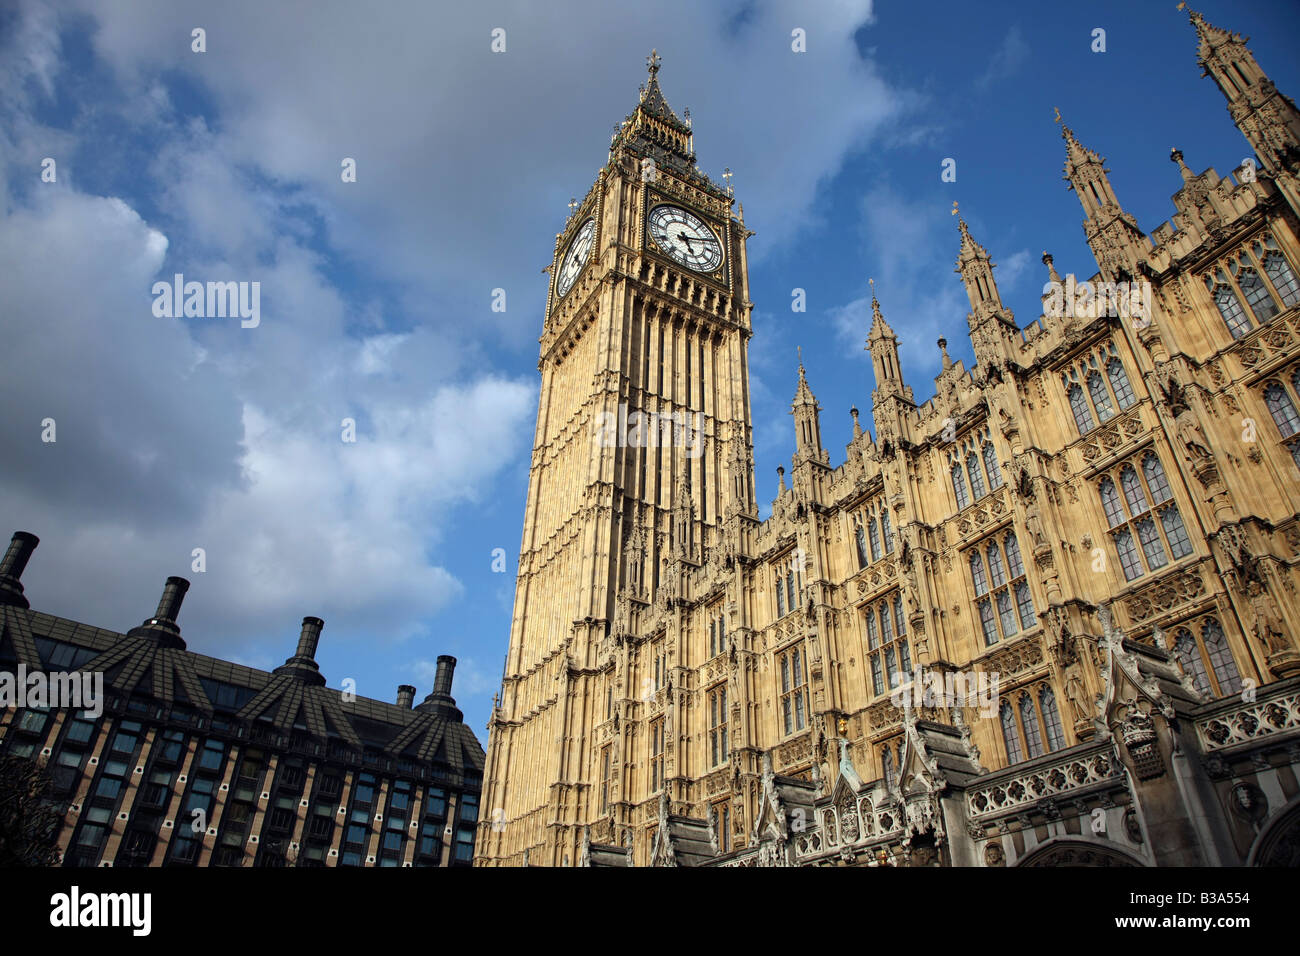 Big Ben and Houses of Parliament from inside perimeter fence, London, UK Stock Photo